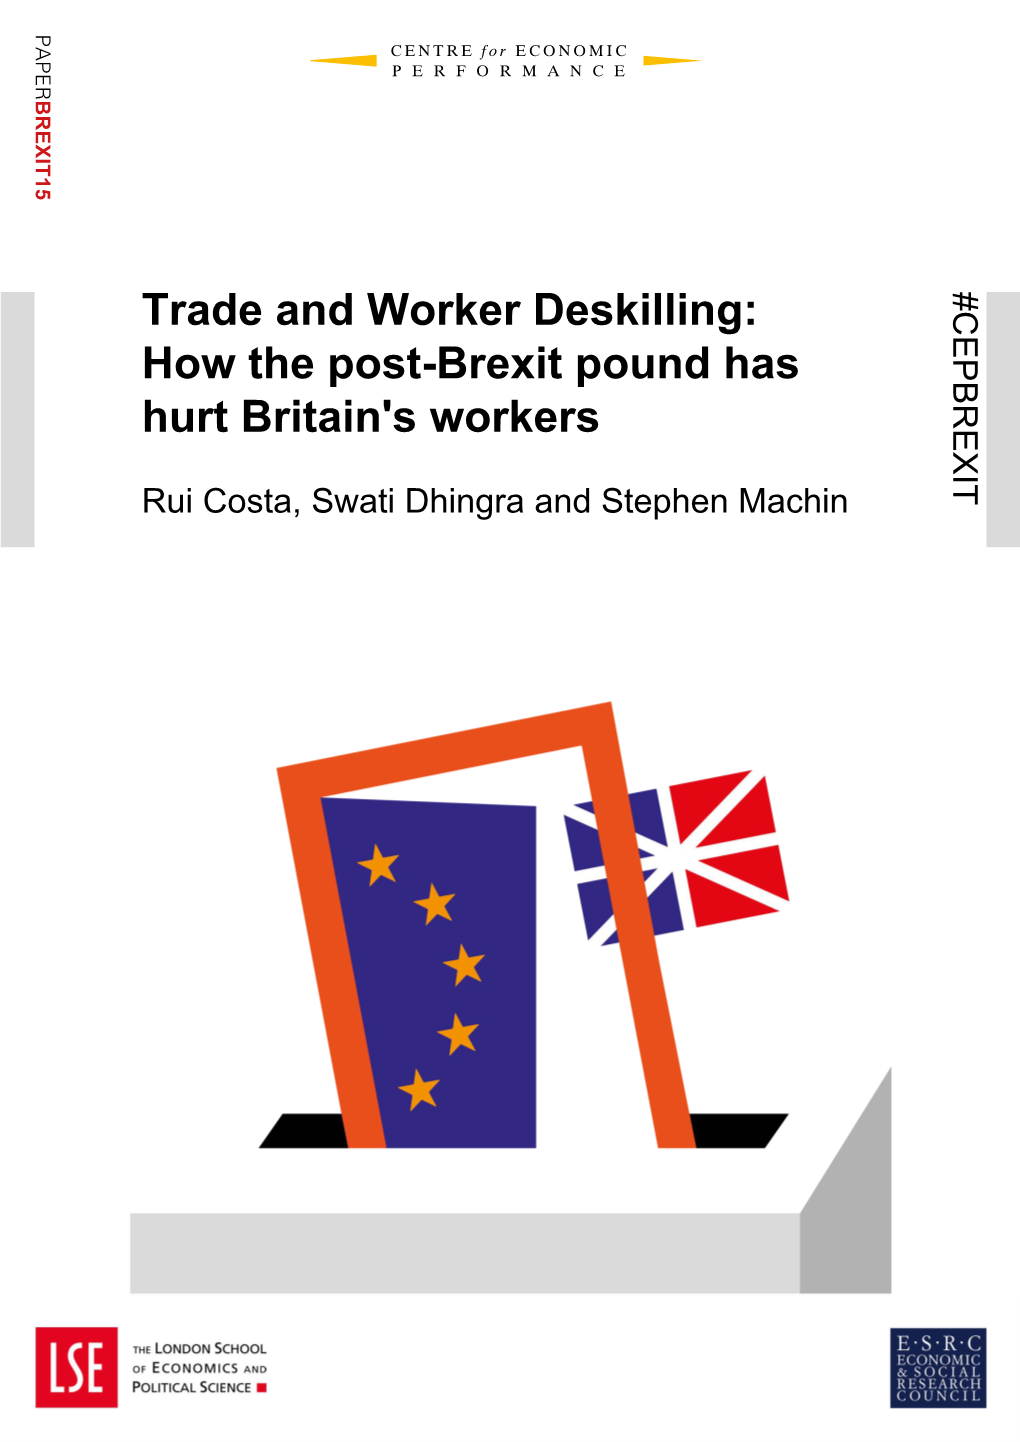 Trade and Worker Deskilling: How the Post-Brexit Pound Has Hurt Britain's